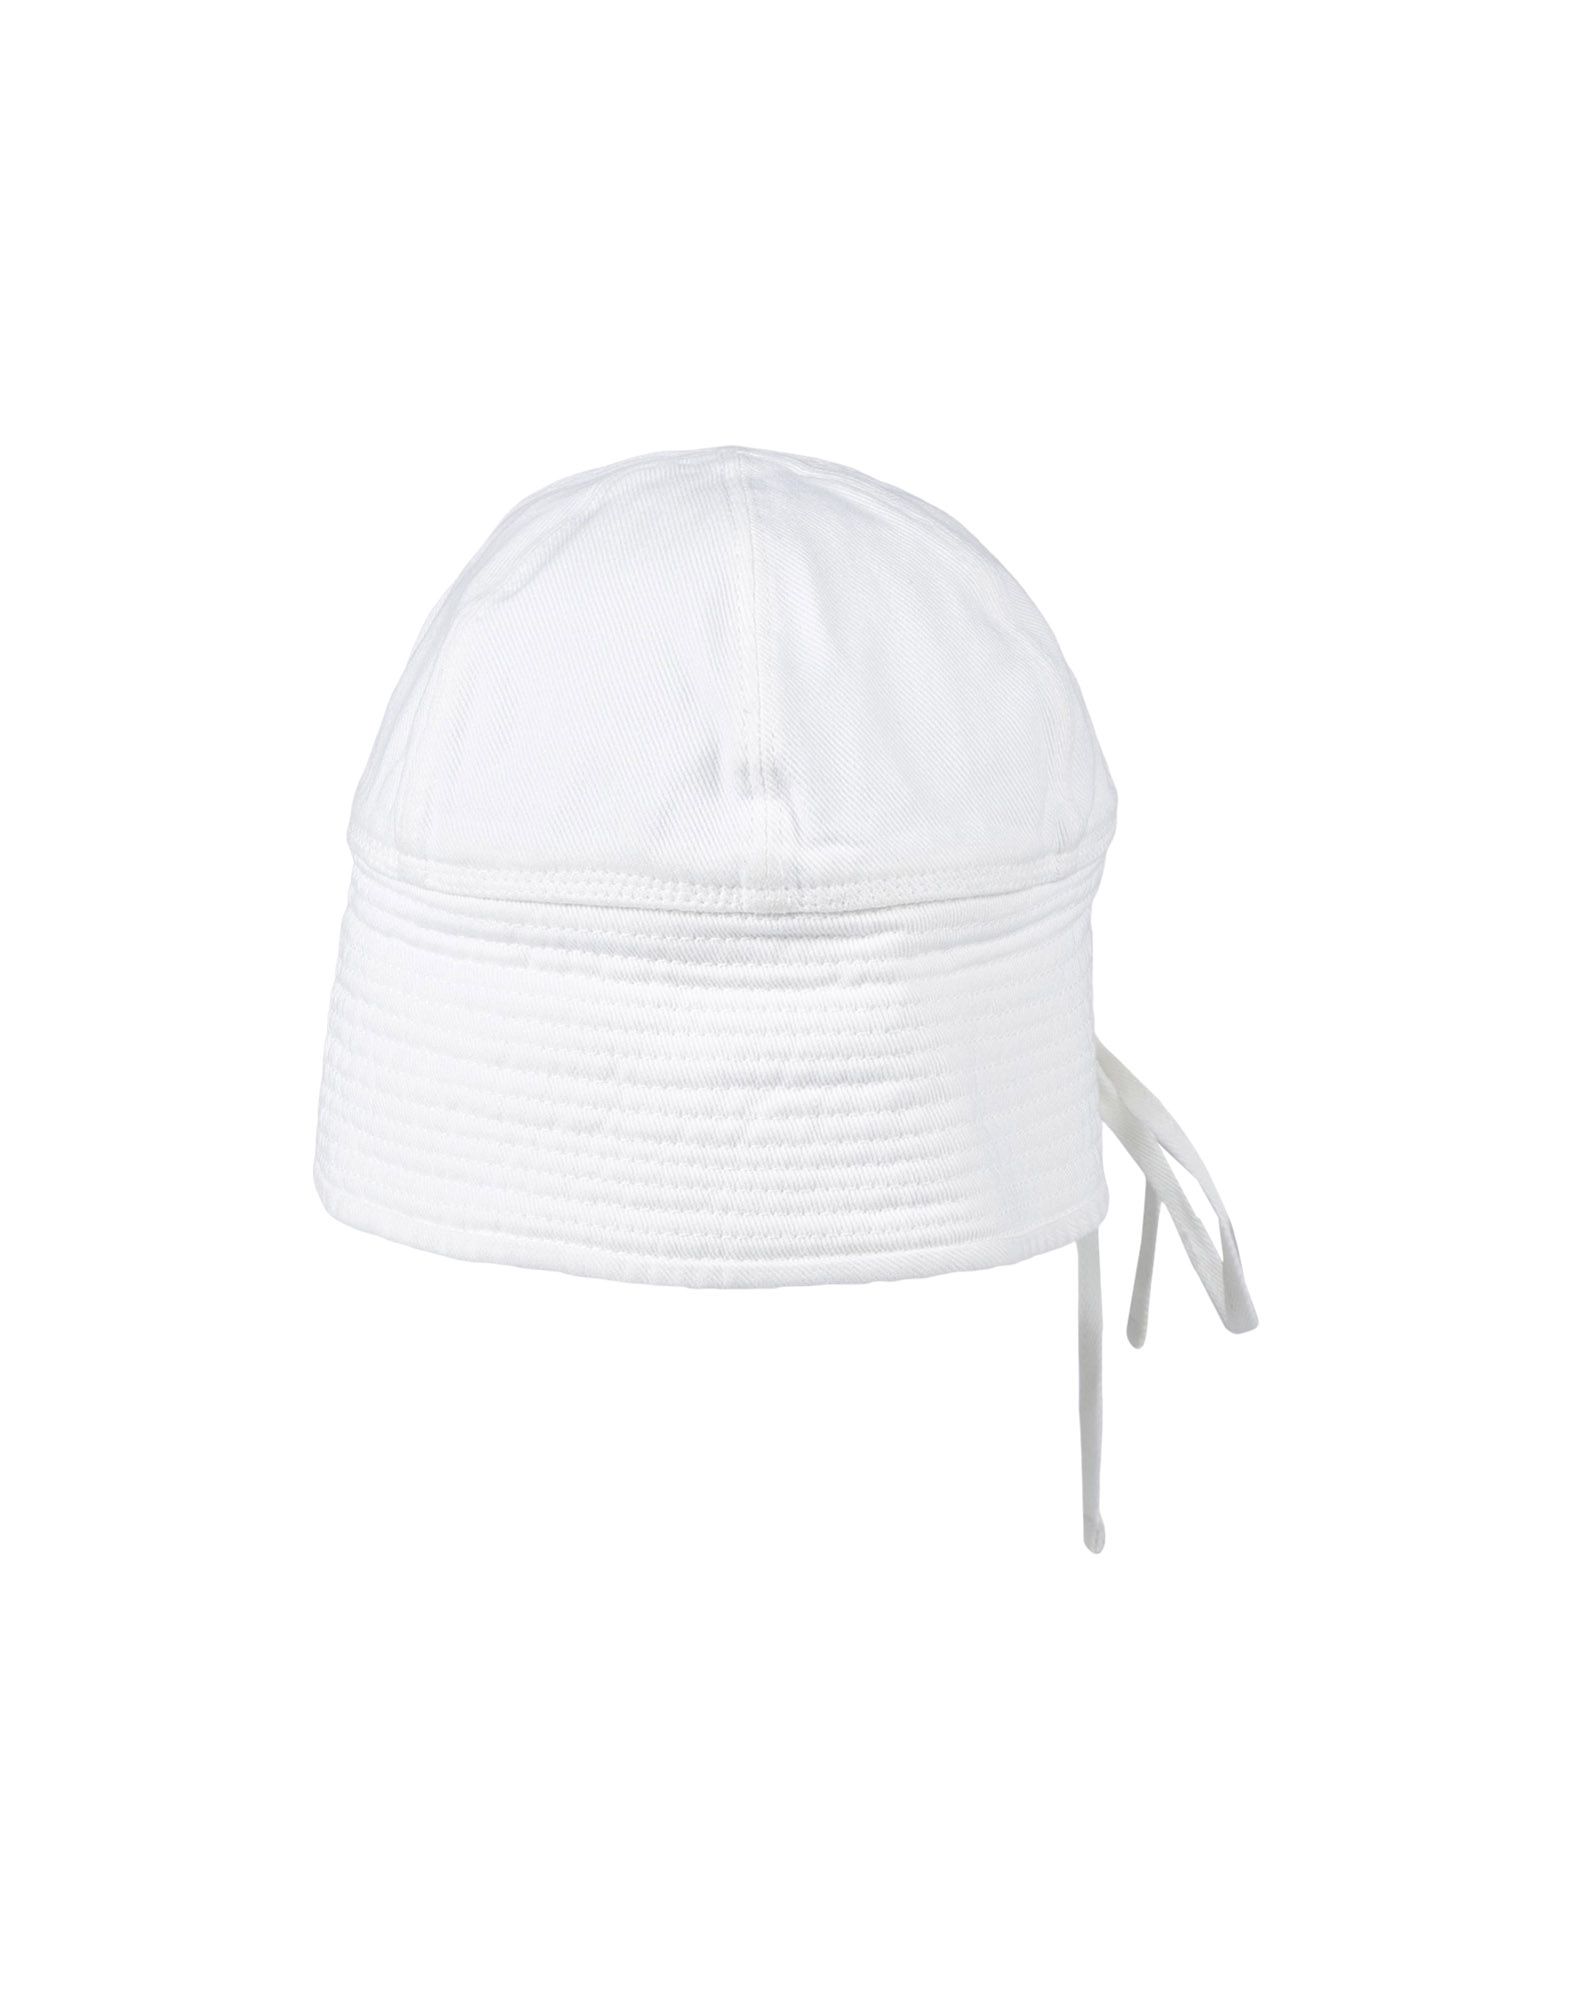 hats in white